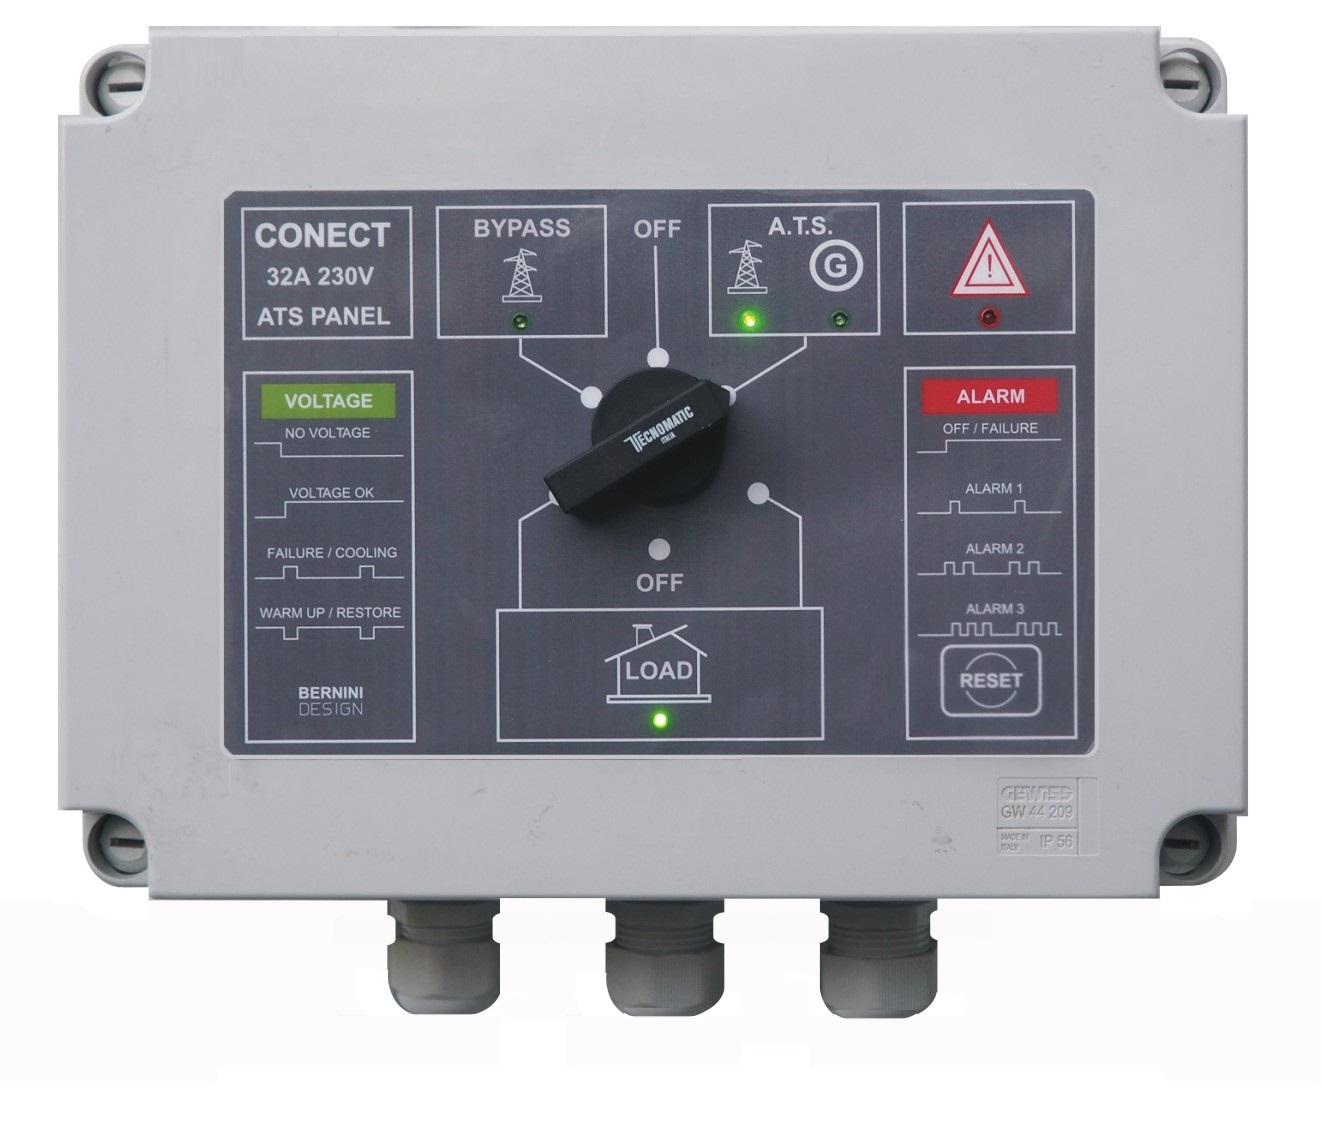 THE CONECT AMF CONTROL PANEL